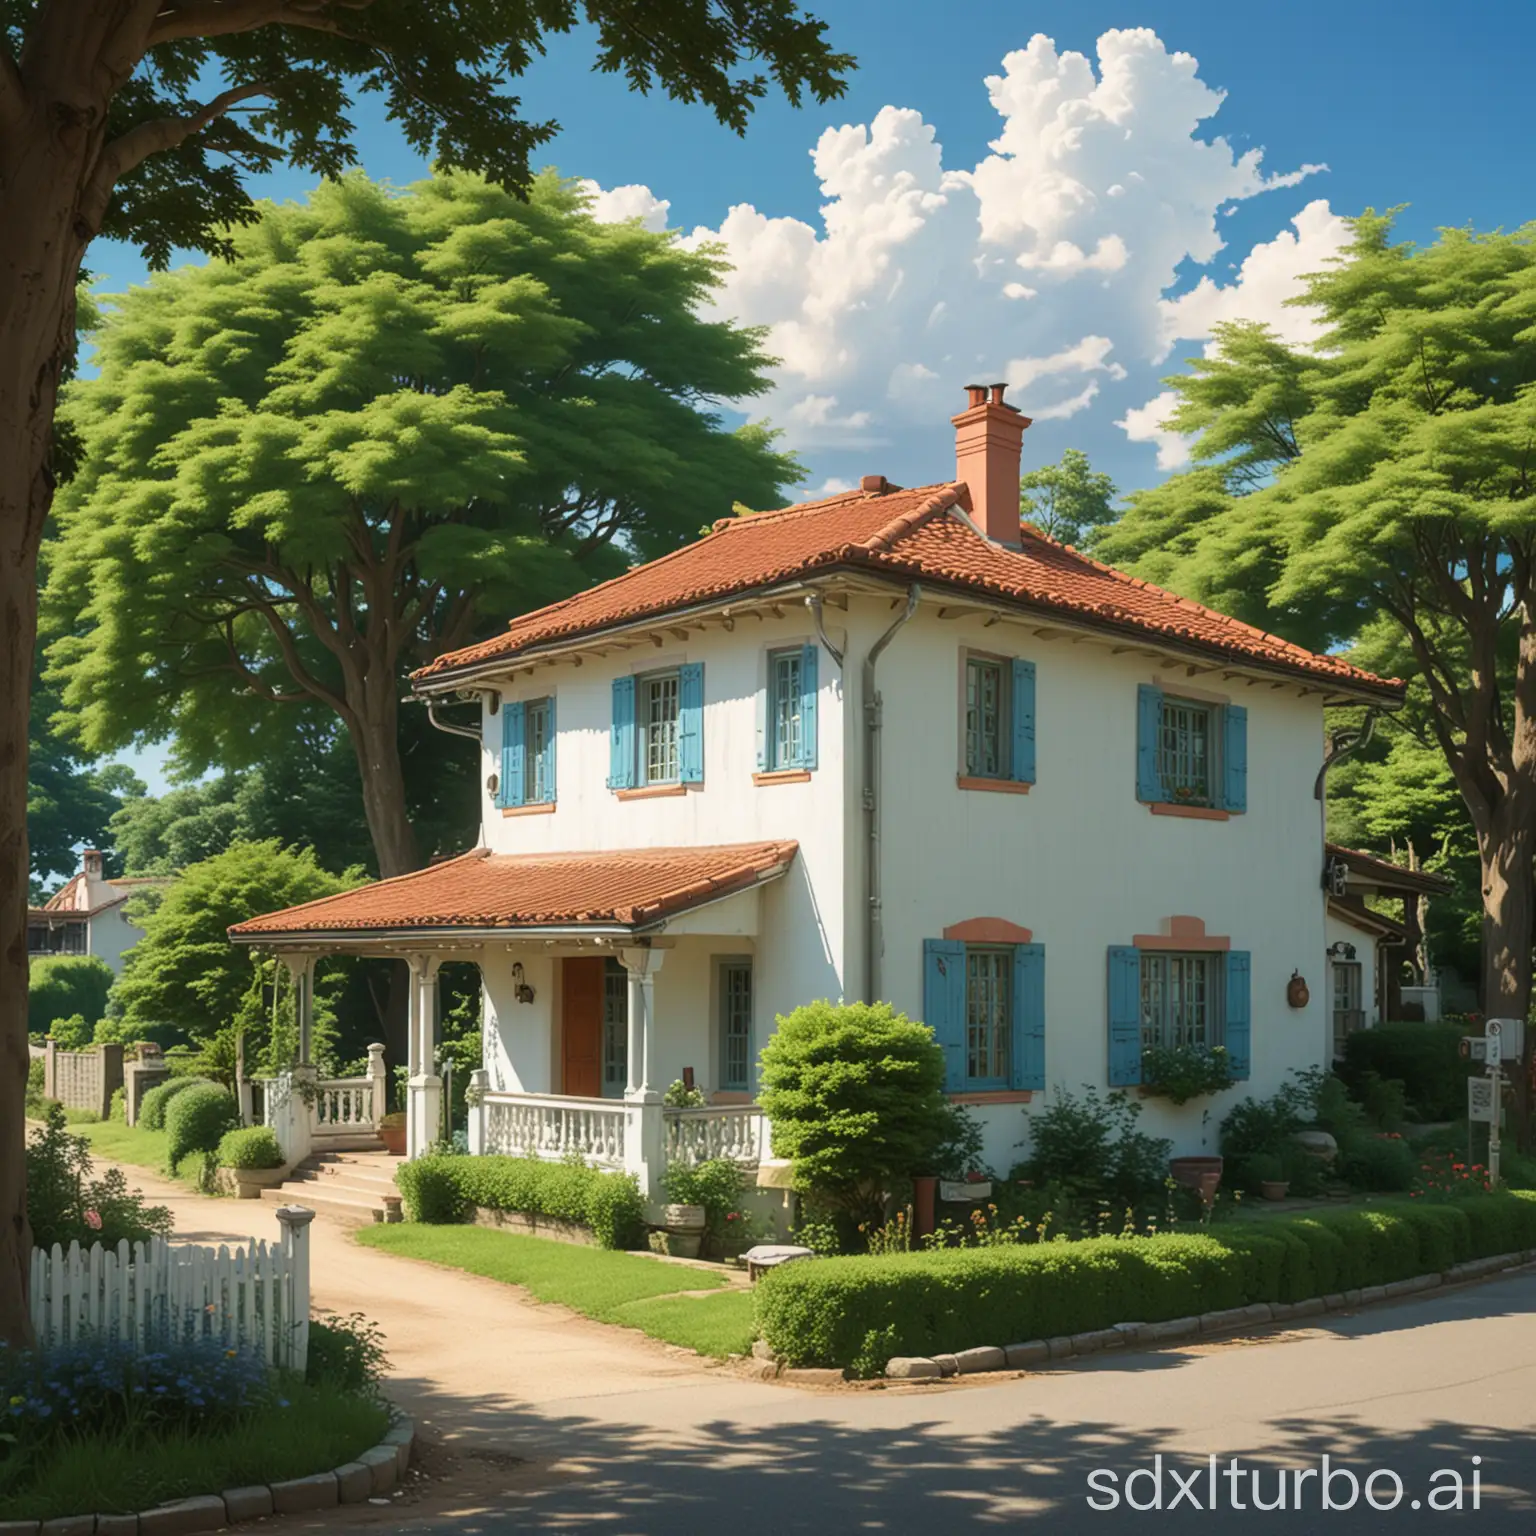 Studio Ghibli anime of a tranquil rural setting. It features a charming two-story house with a white exterior and terracotta roof tiles. The house is adorned with green shutters on its multiple windows, some of which are open, and has a welcoming wooden door.  In the foreground, there's a classic mid-20th century car, painted blue with chrome detailing, parked on a dirt road or driveway leading to the house. The surrounding area is rich with greenery, including large trees that provide ample shade, one prominently on the left side of the frame. The lush foliage suggests it's either late spring or summer.  The scene is set against a clear blue sky with a few scattered clouds, indicating a bright and sunny day. Detailed, vivid